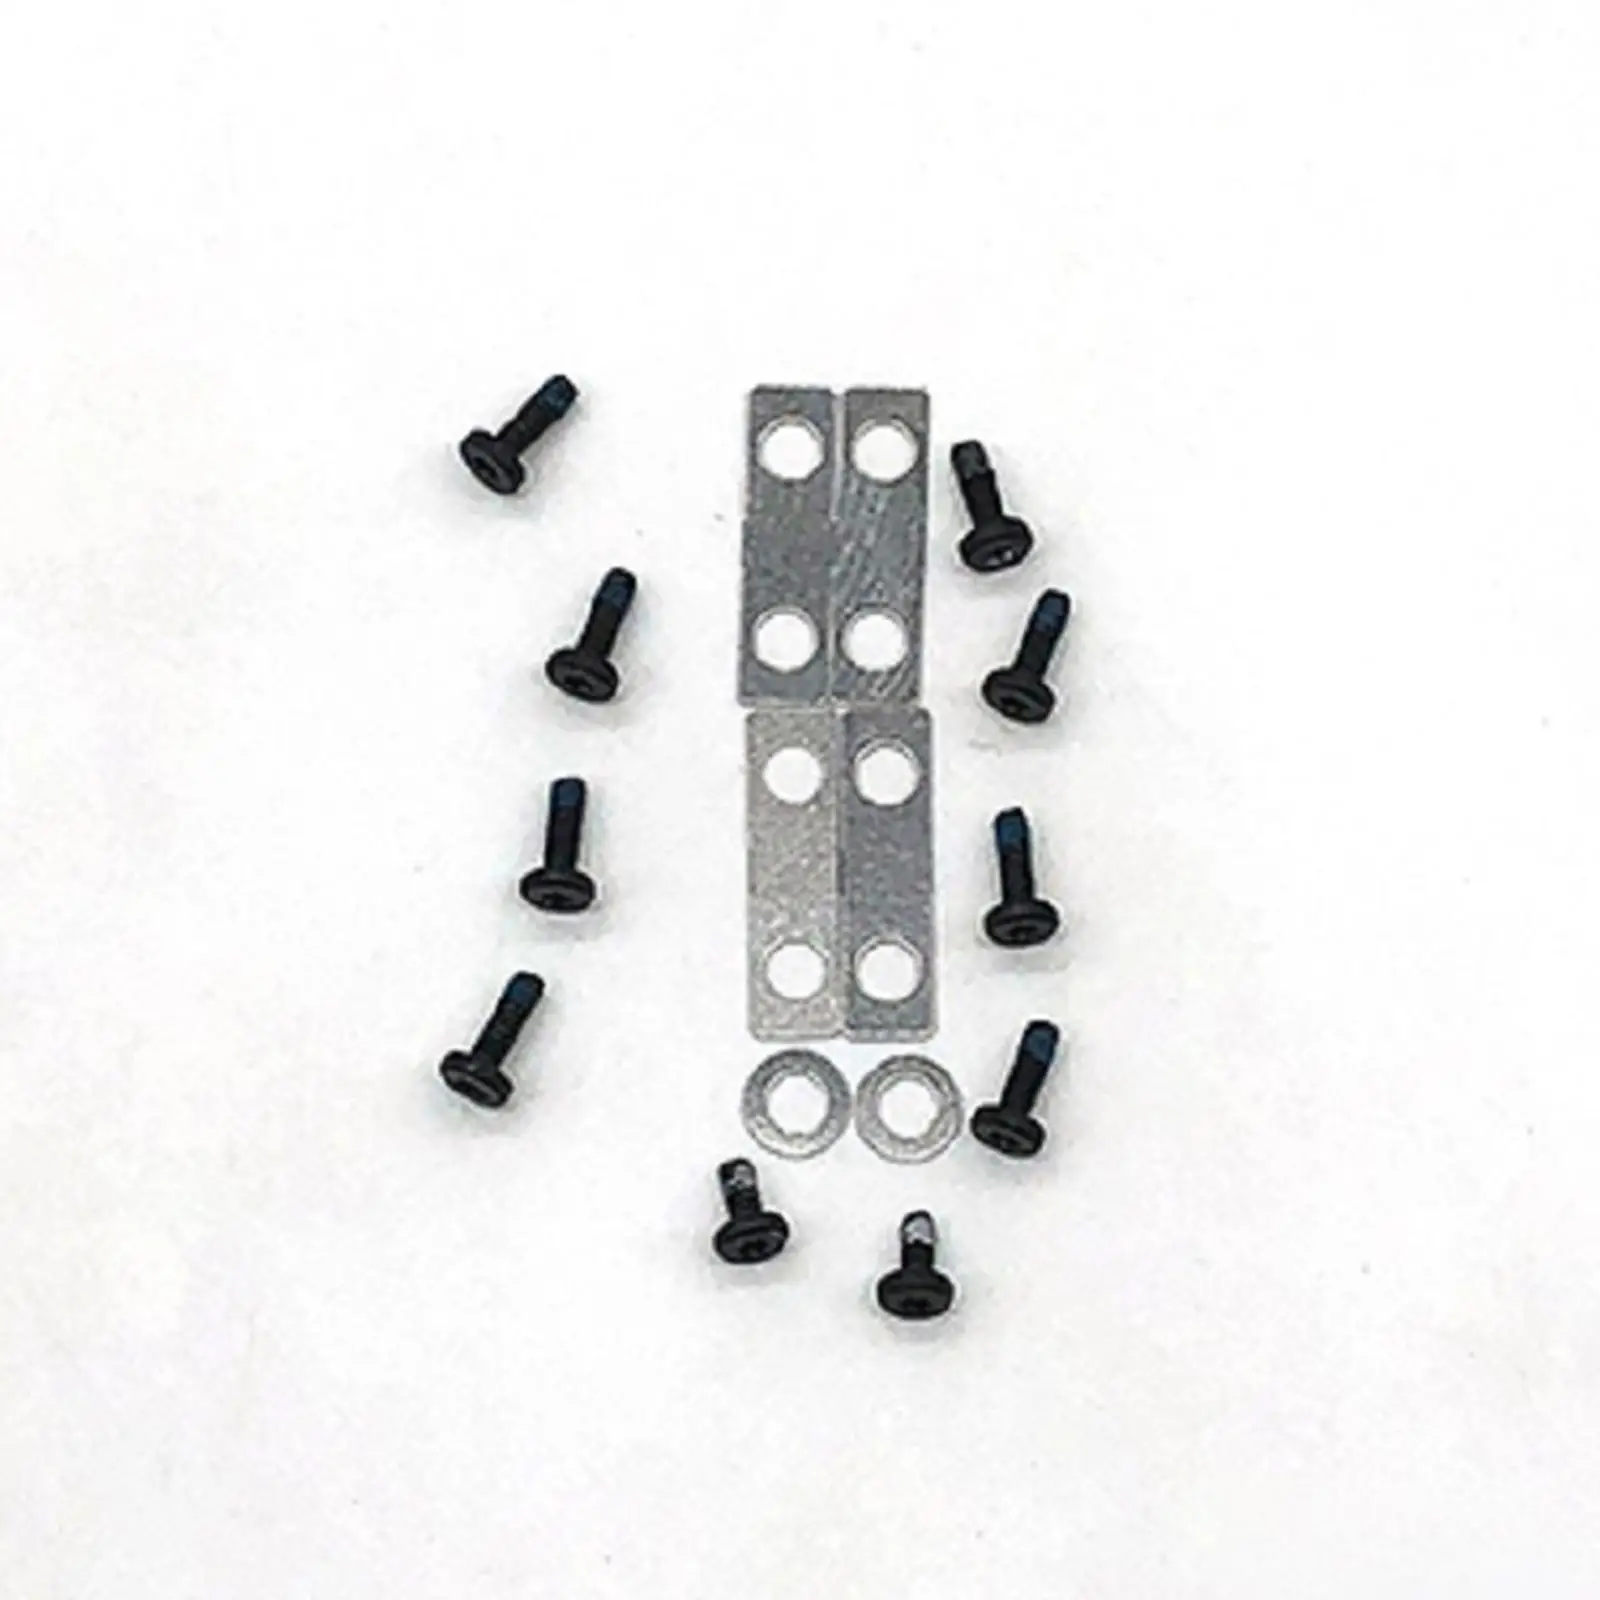 Trackpad Screws Gasket Set Touchpad Fastener Replacement Repairing for MacBook Pro Air A1706 A1707 A1708 A1932 Laptop Parts images - 6